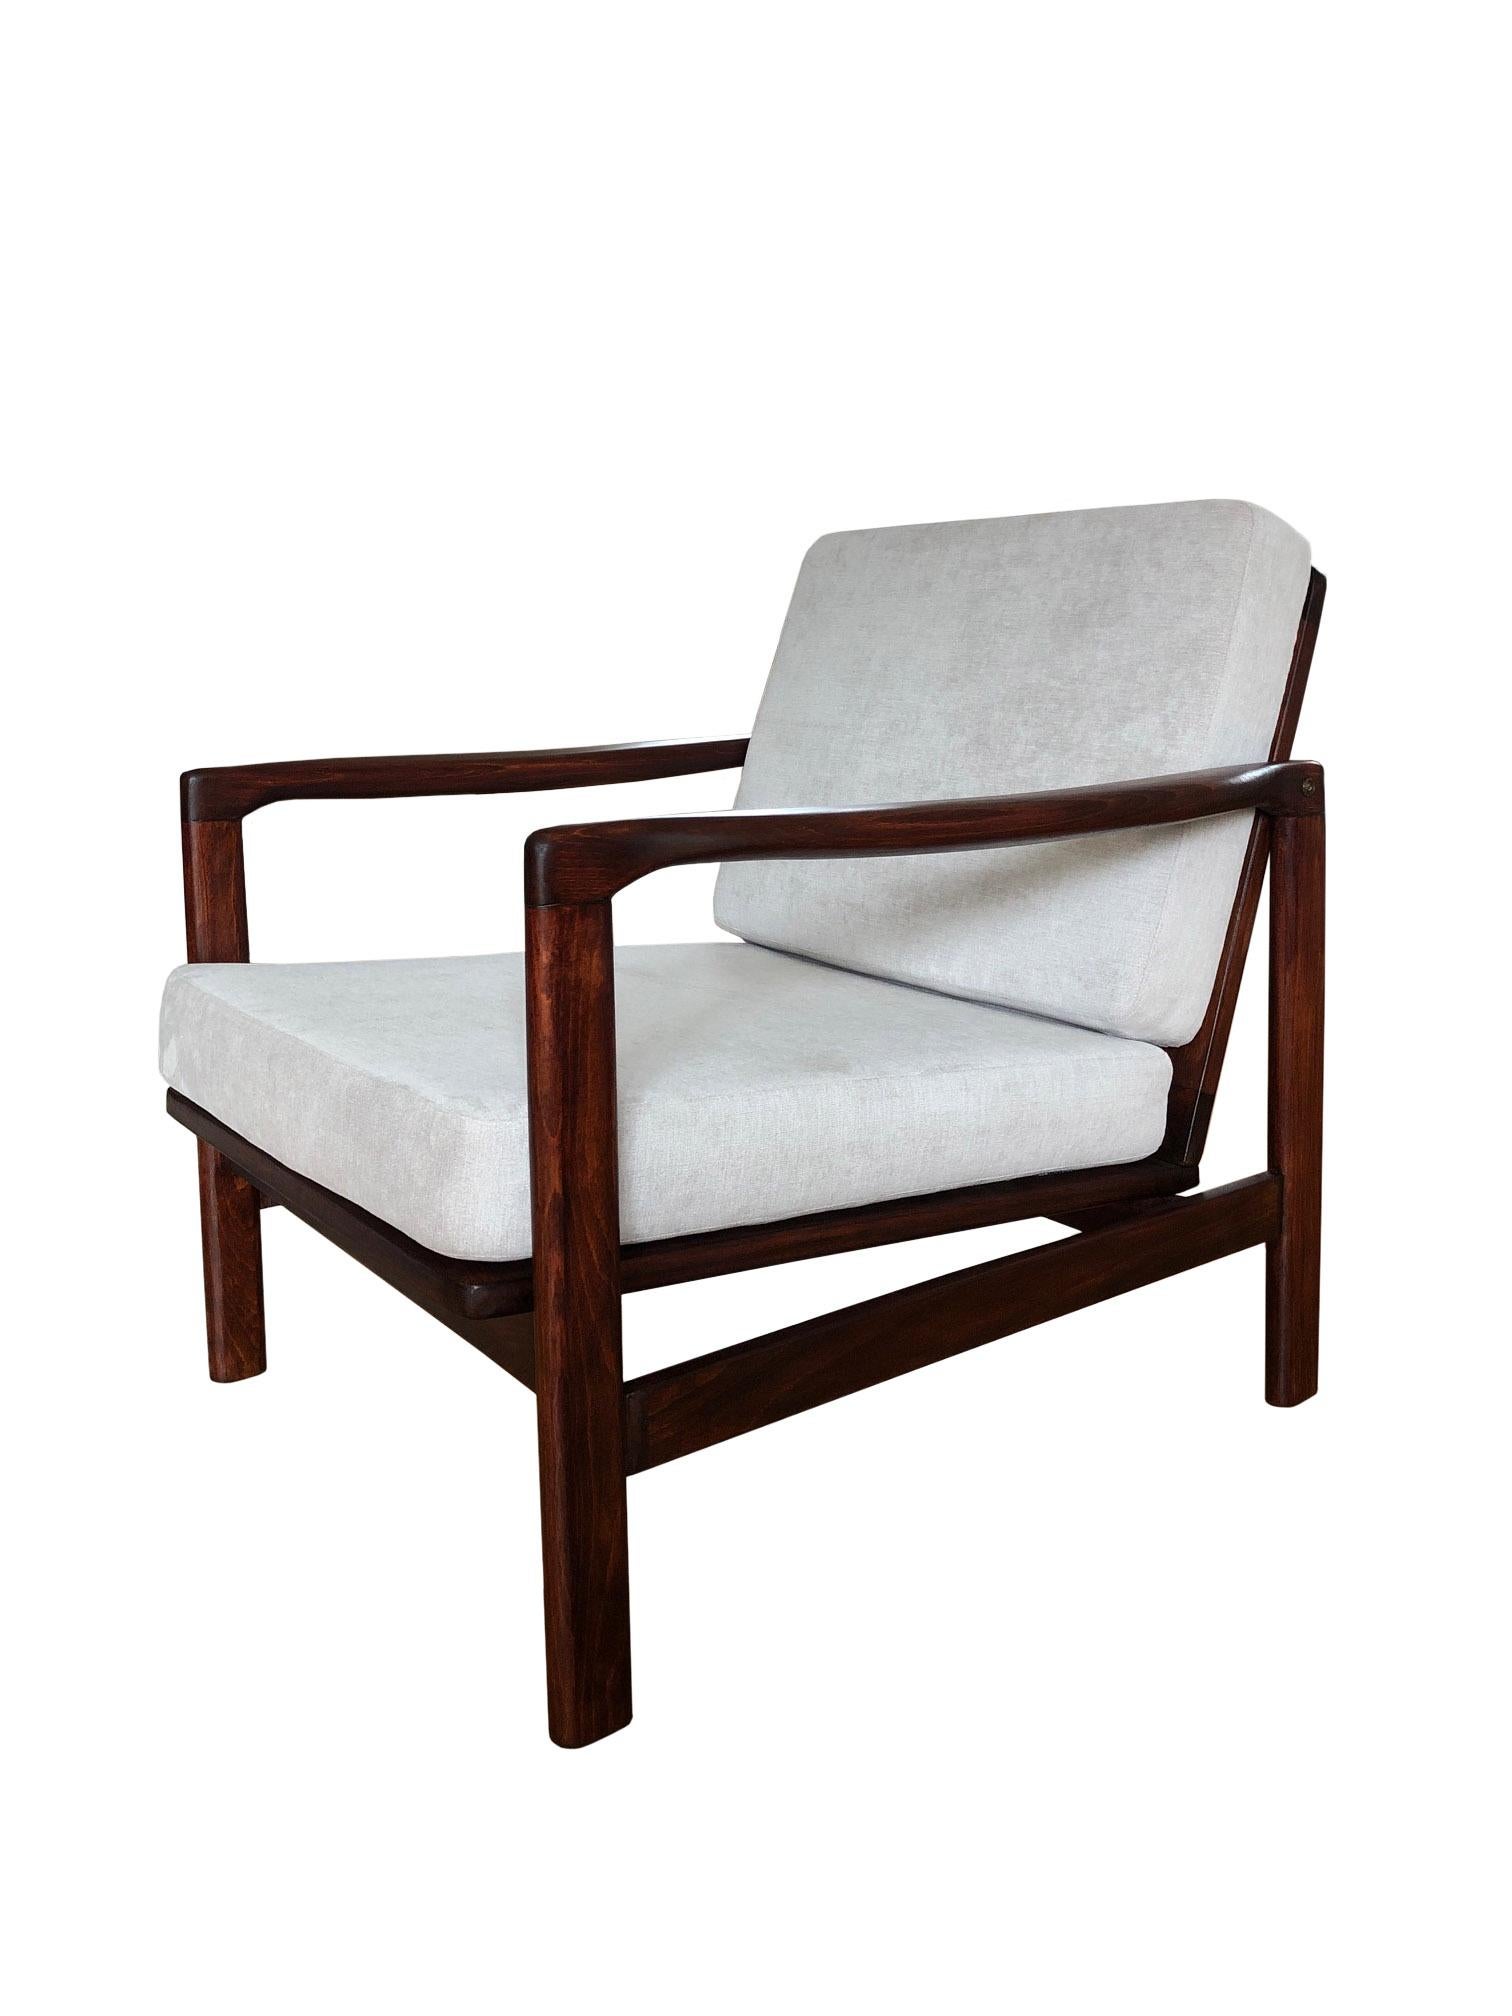 The set of two lounge chairs model B-7752, designed by Zenon Baczyk, has been manufactured by Swarzedzkie Fabryki Mebli in Poland in the 1960s. The structure is made of beech wood in a warm walnut color, finished with a semi matte varnish. The